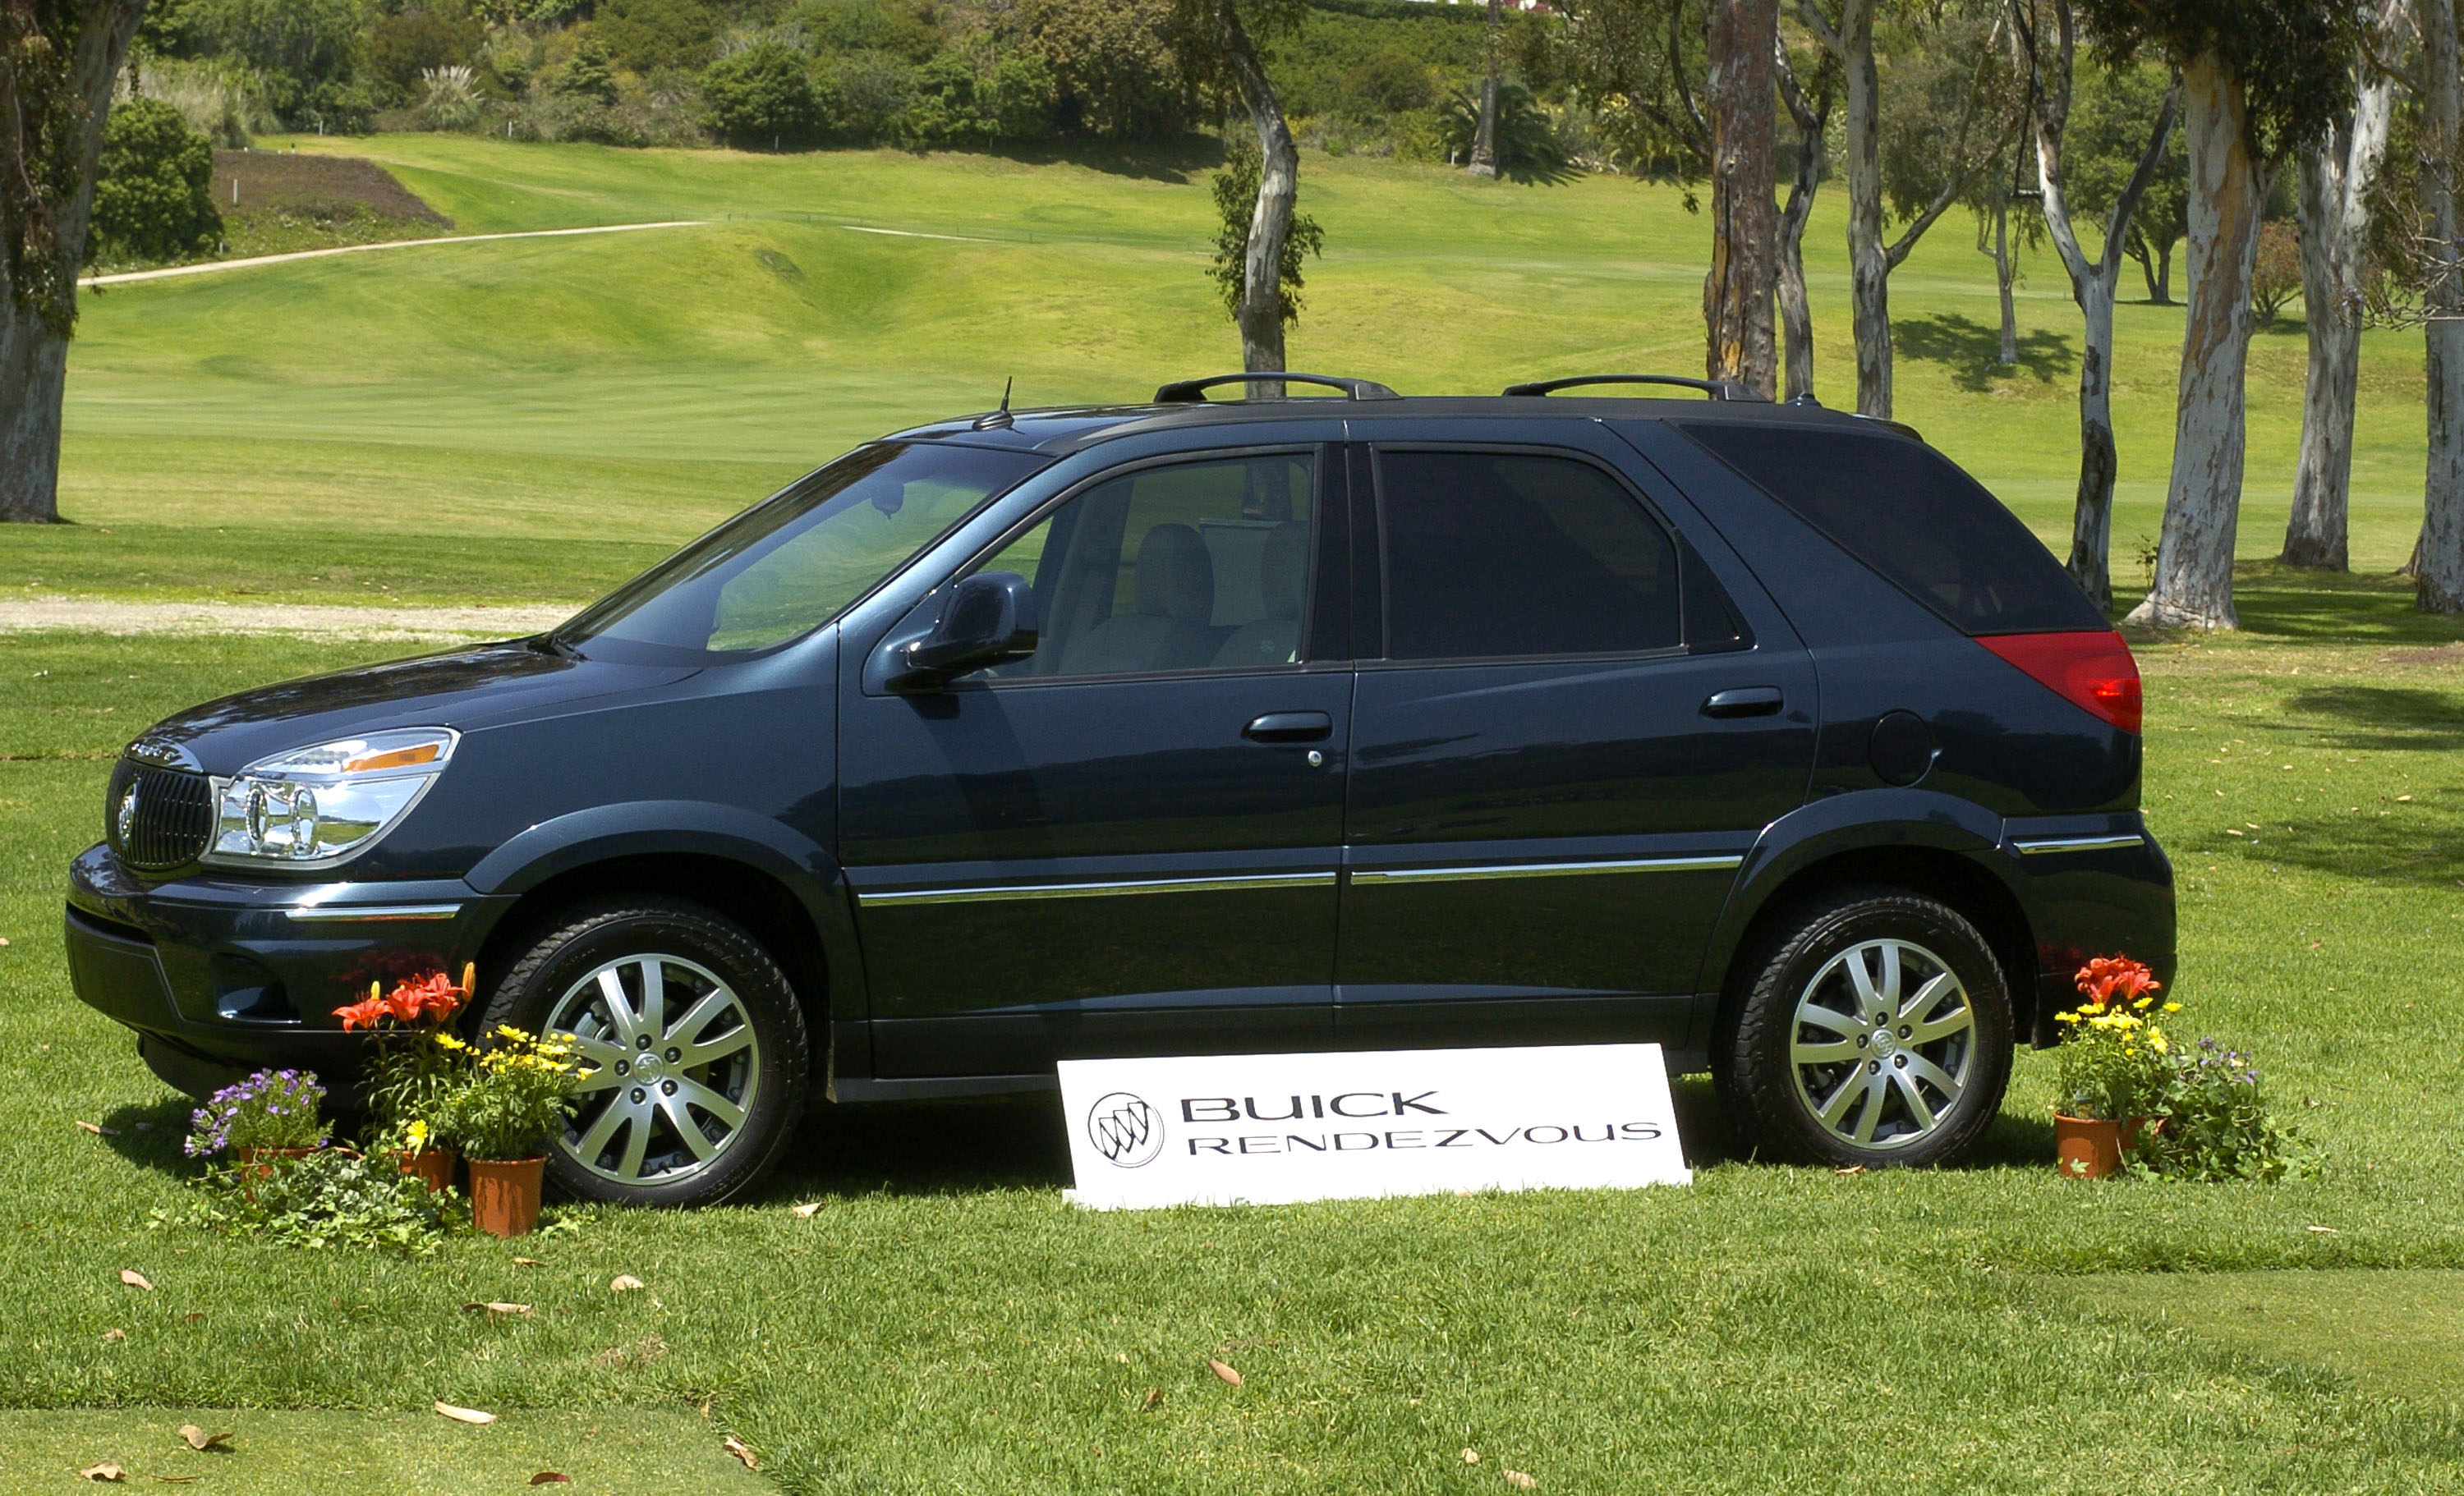 A Buick Rendezvous on display in the grass